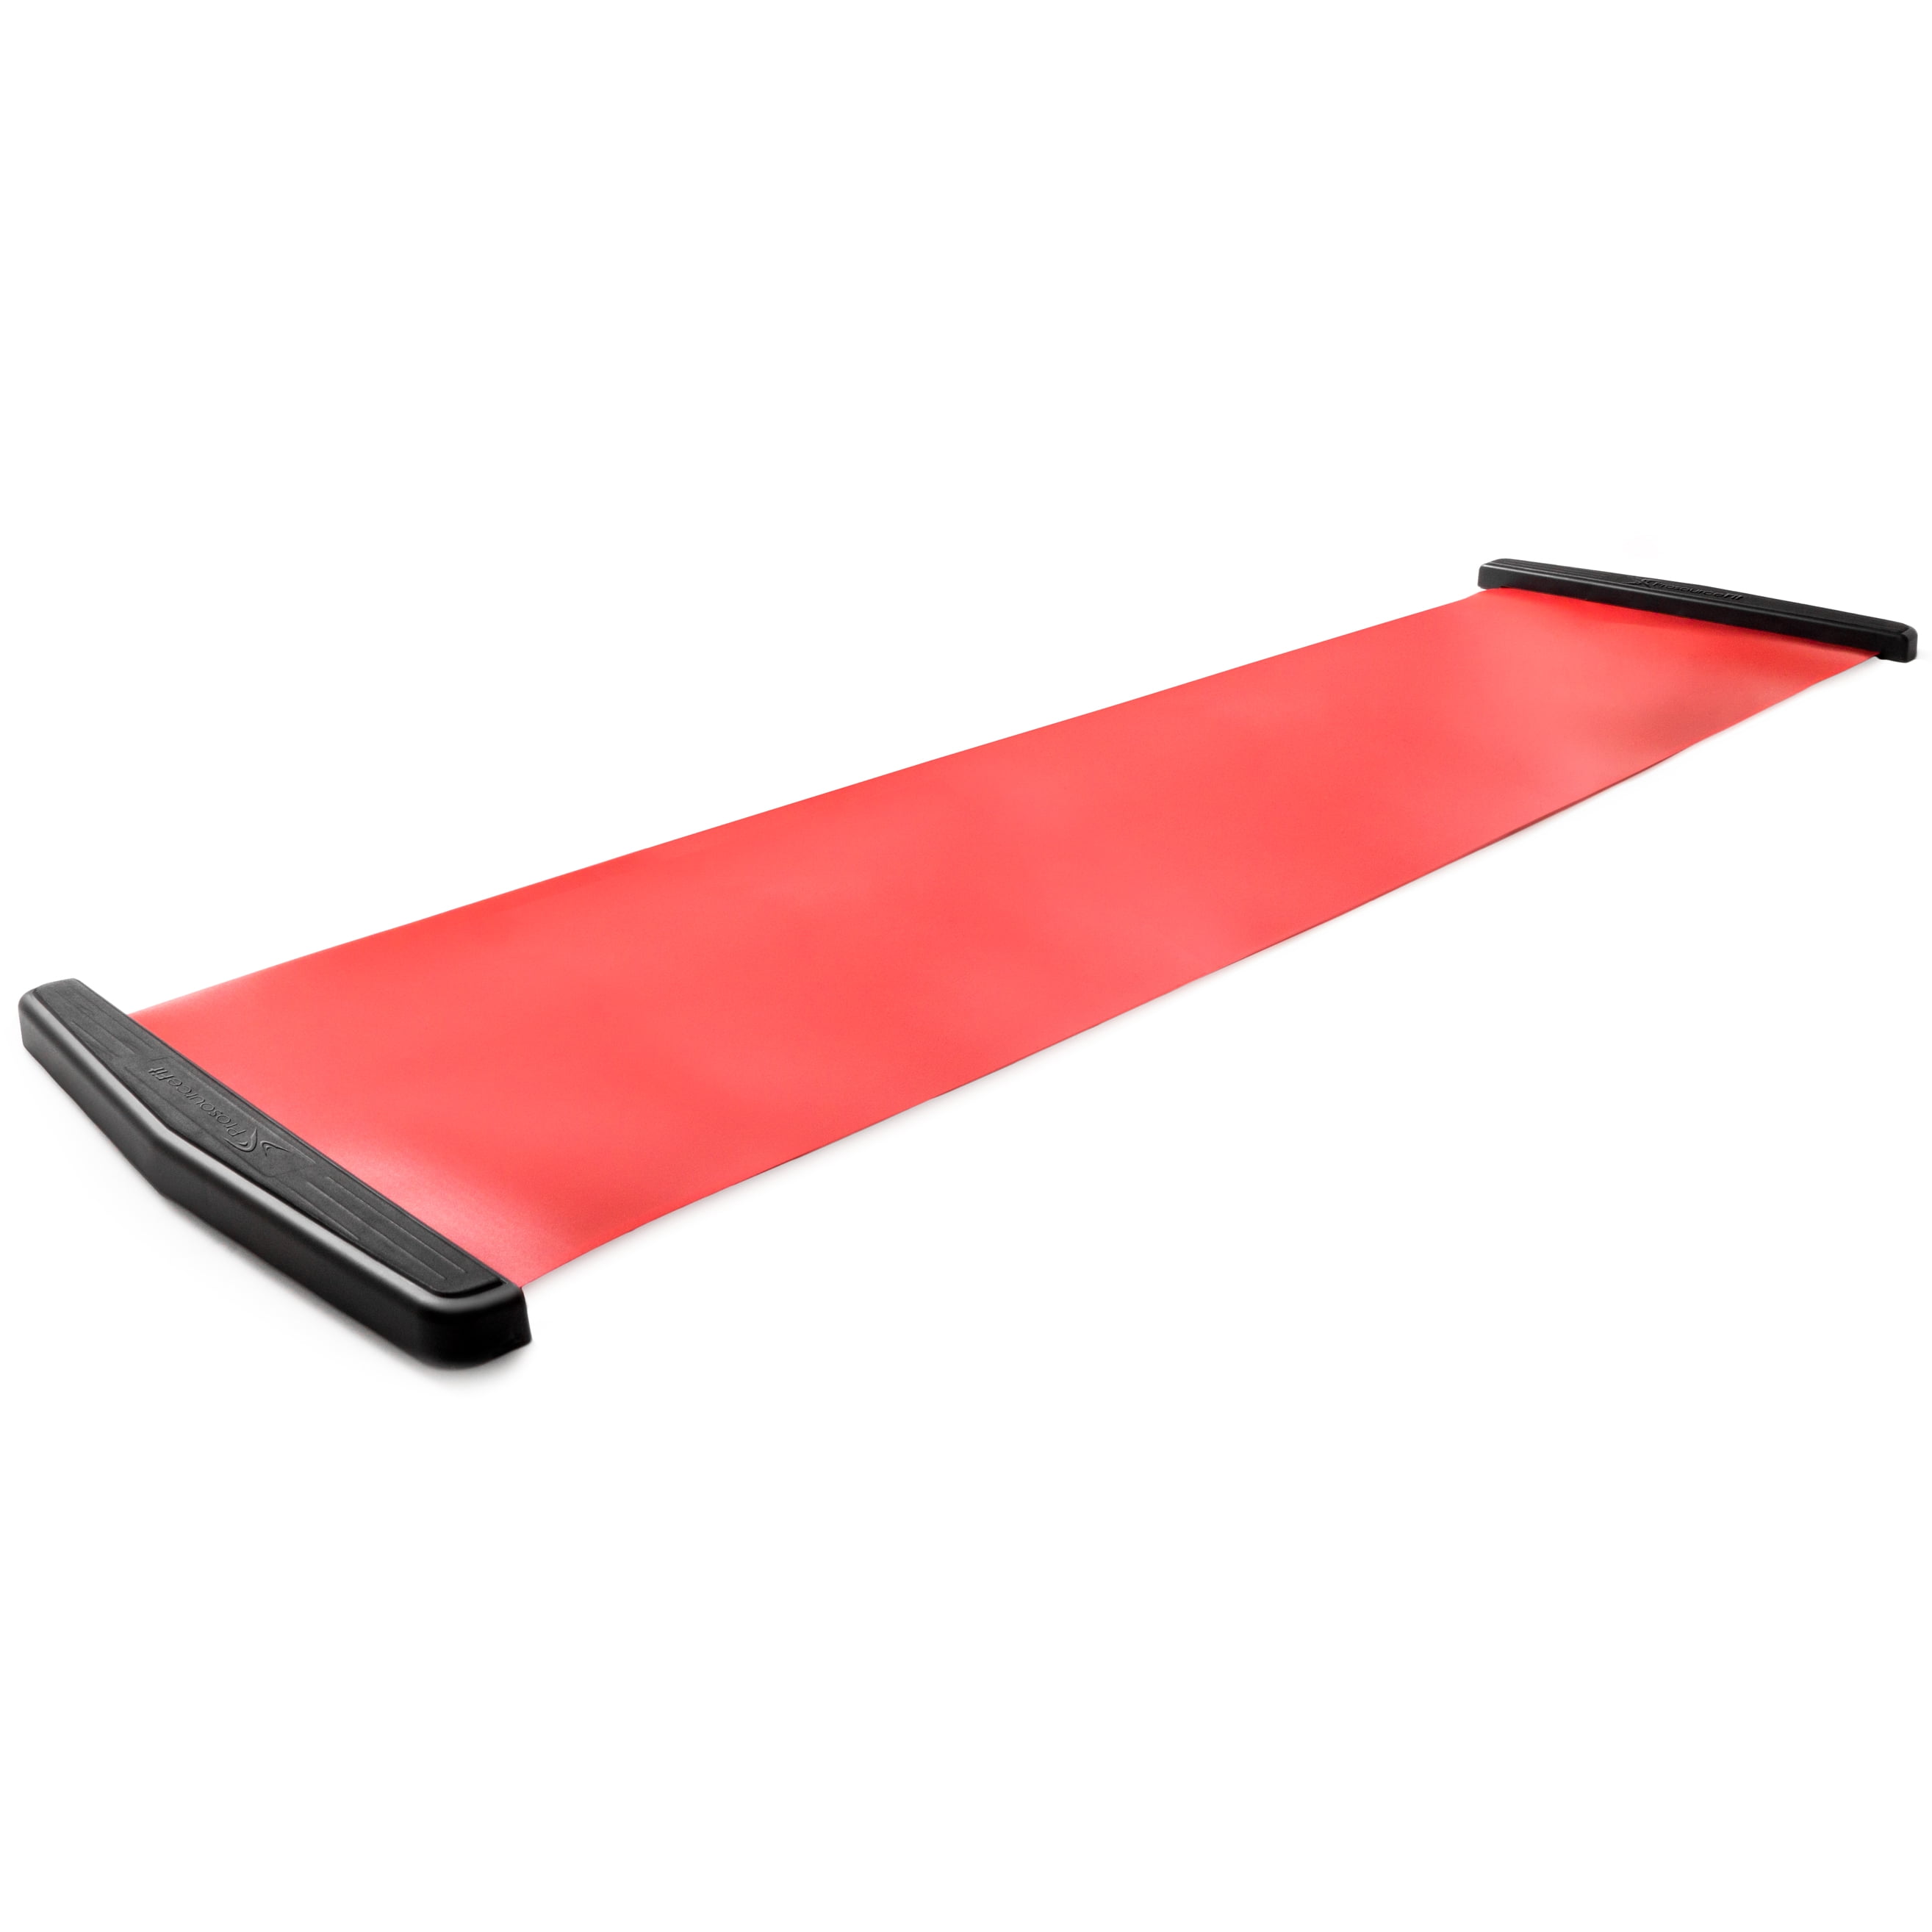 Workout Board for Fitness Training and... American Lifetime Slide Board